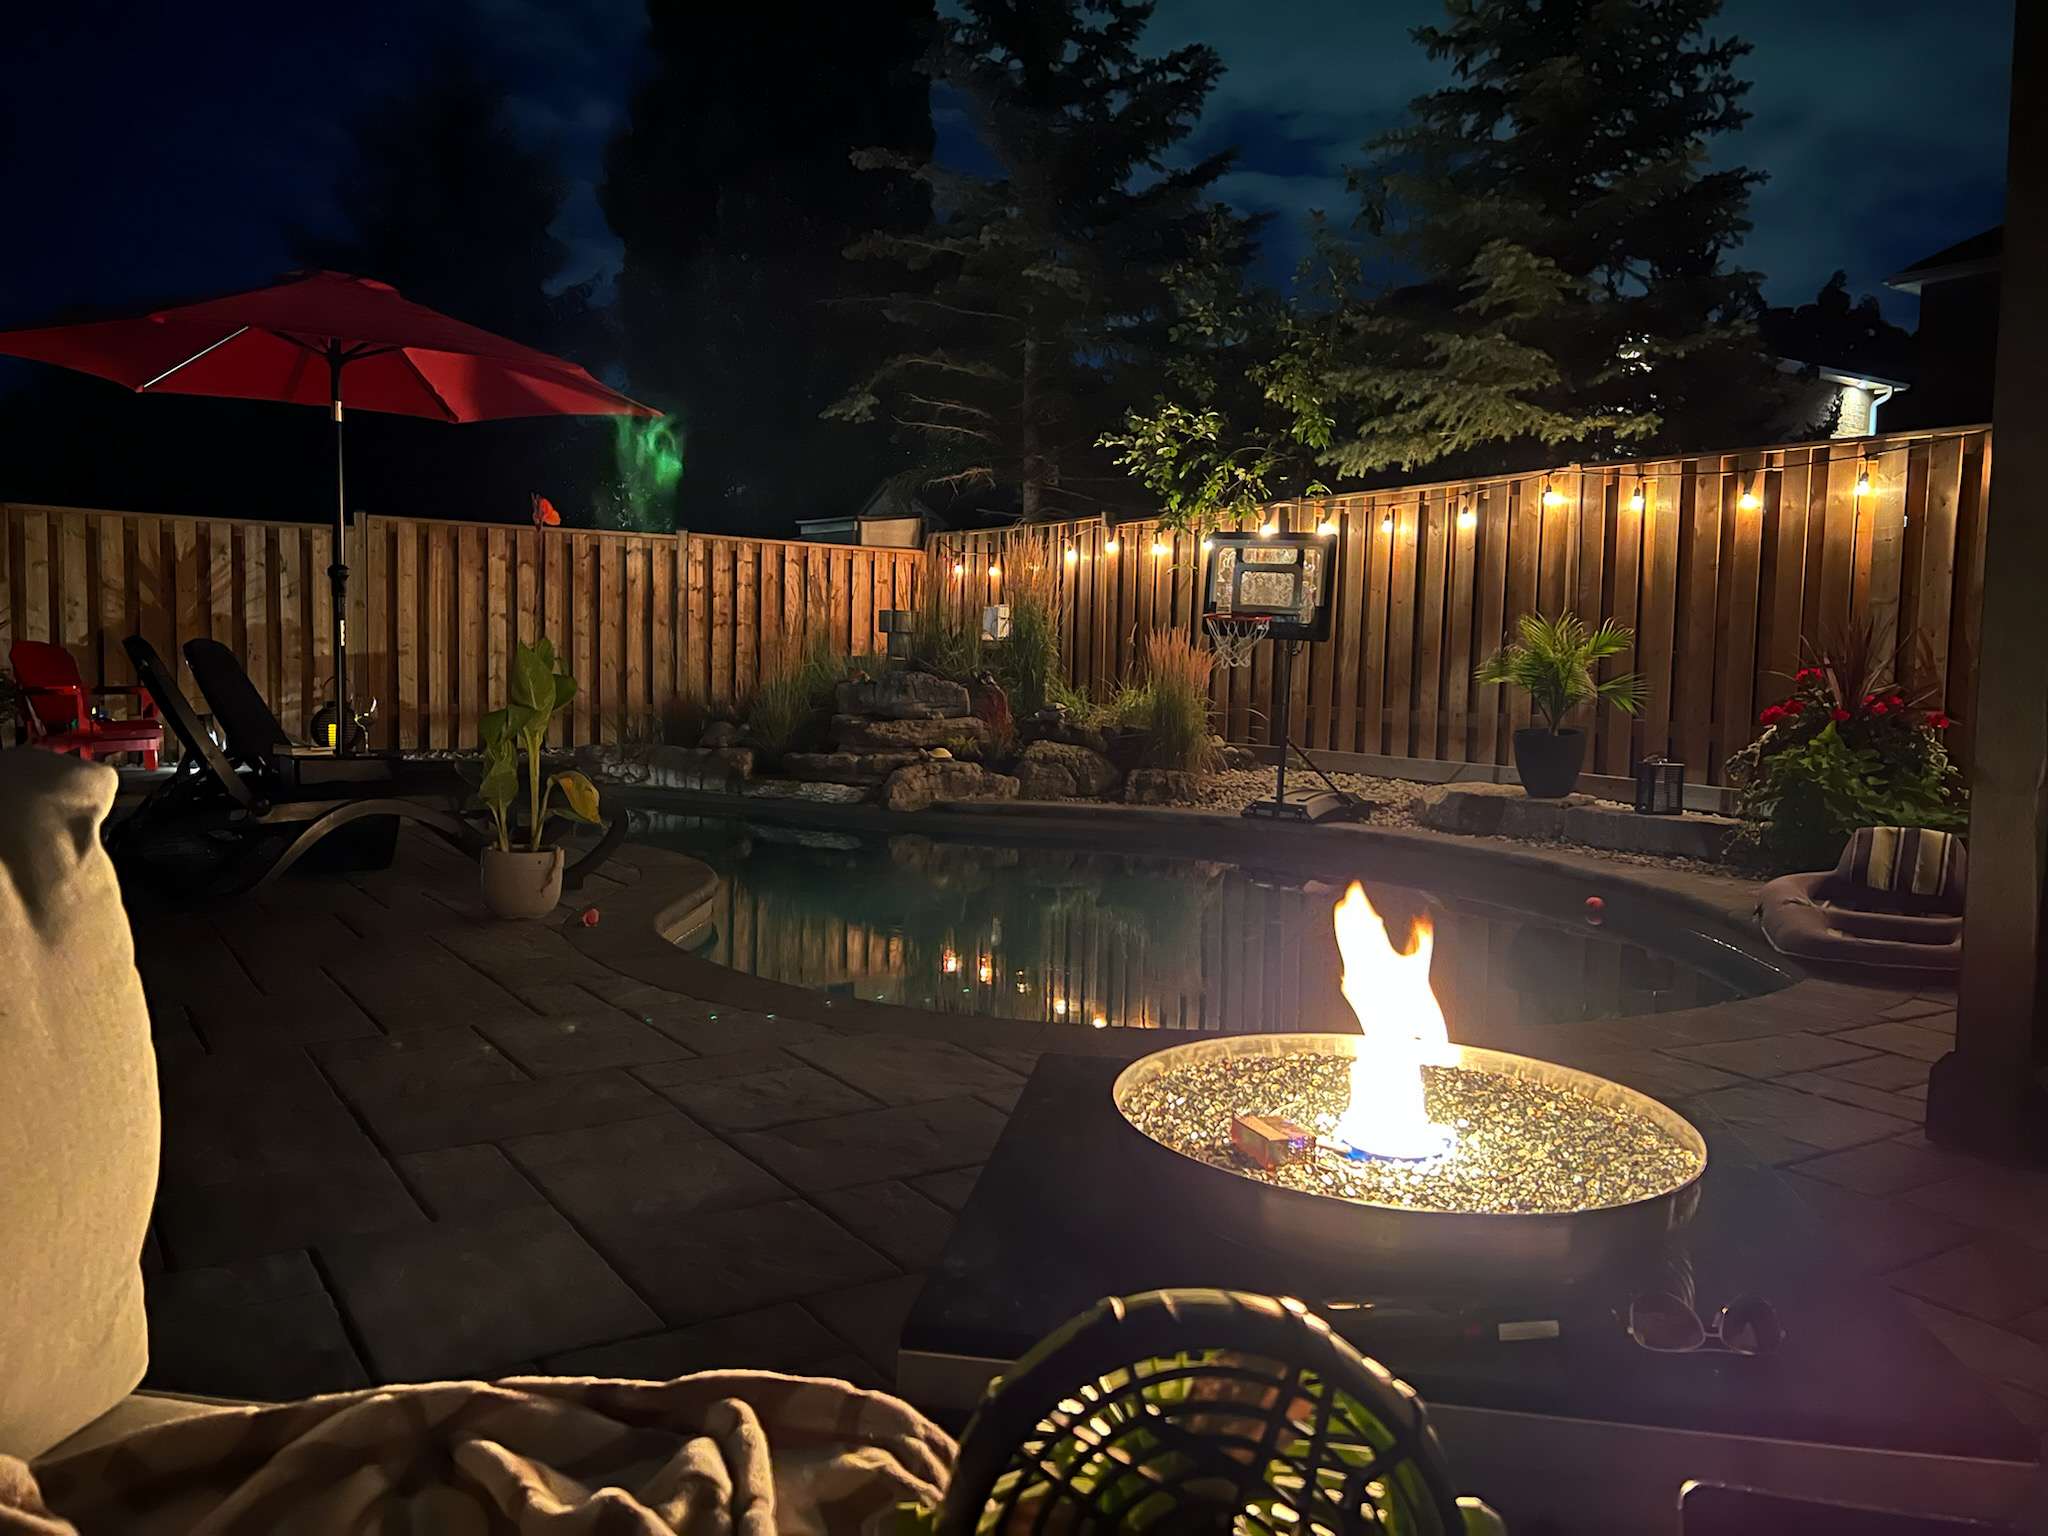 Patio and wood fence with firepit